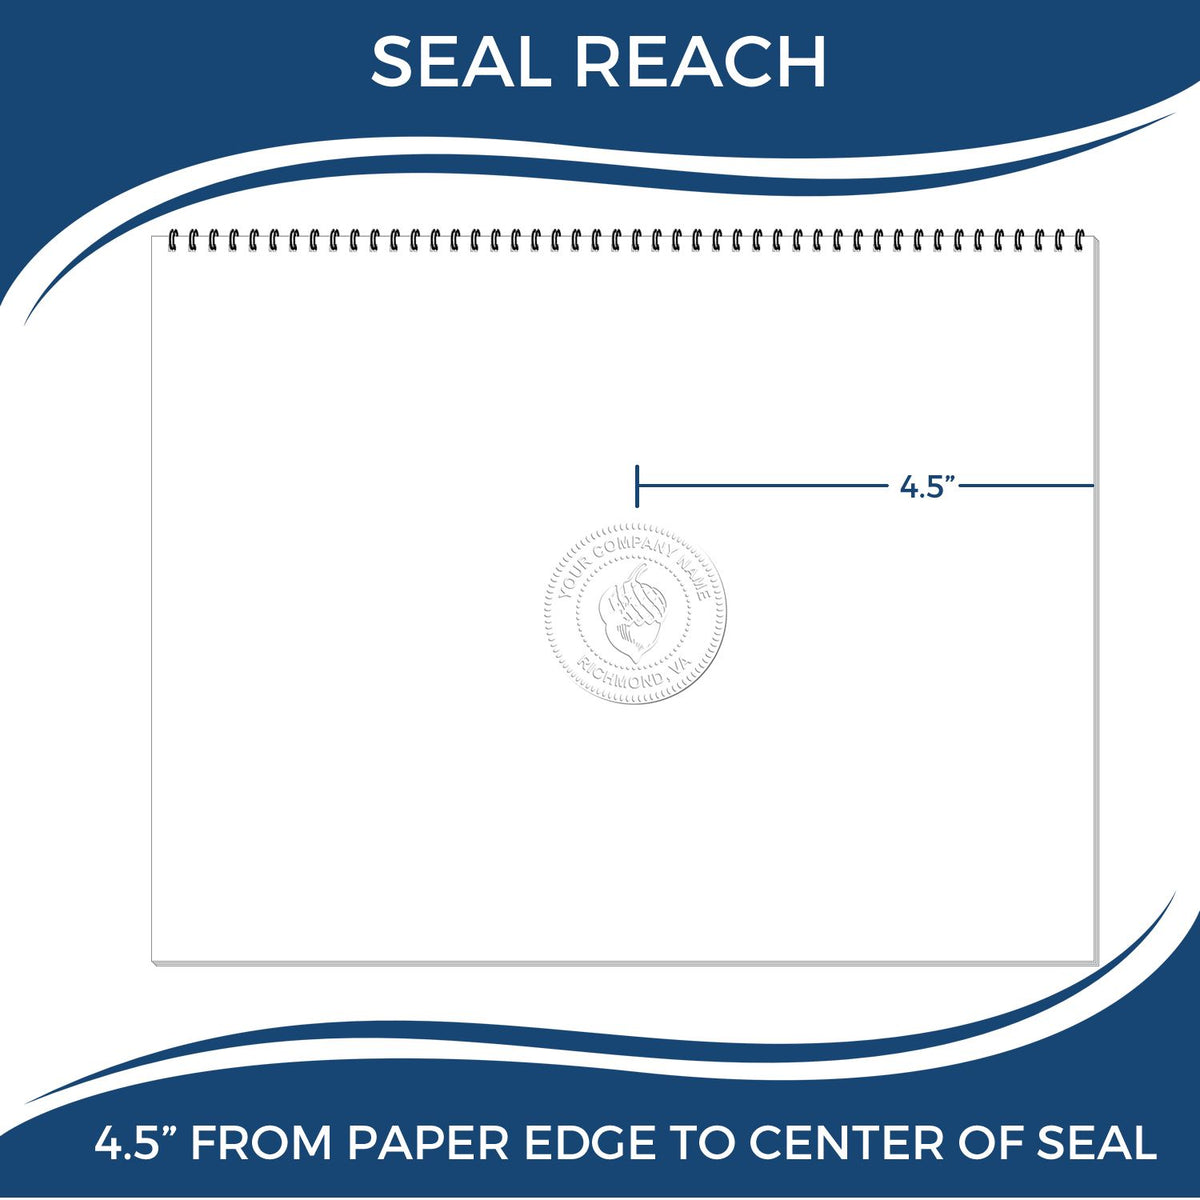 An infographic showing the seal reach which is represented by a ruler and a miniature seal image of the Extended Long Reach Virginia Architect Seal Embosser